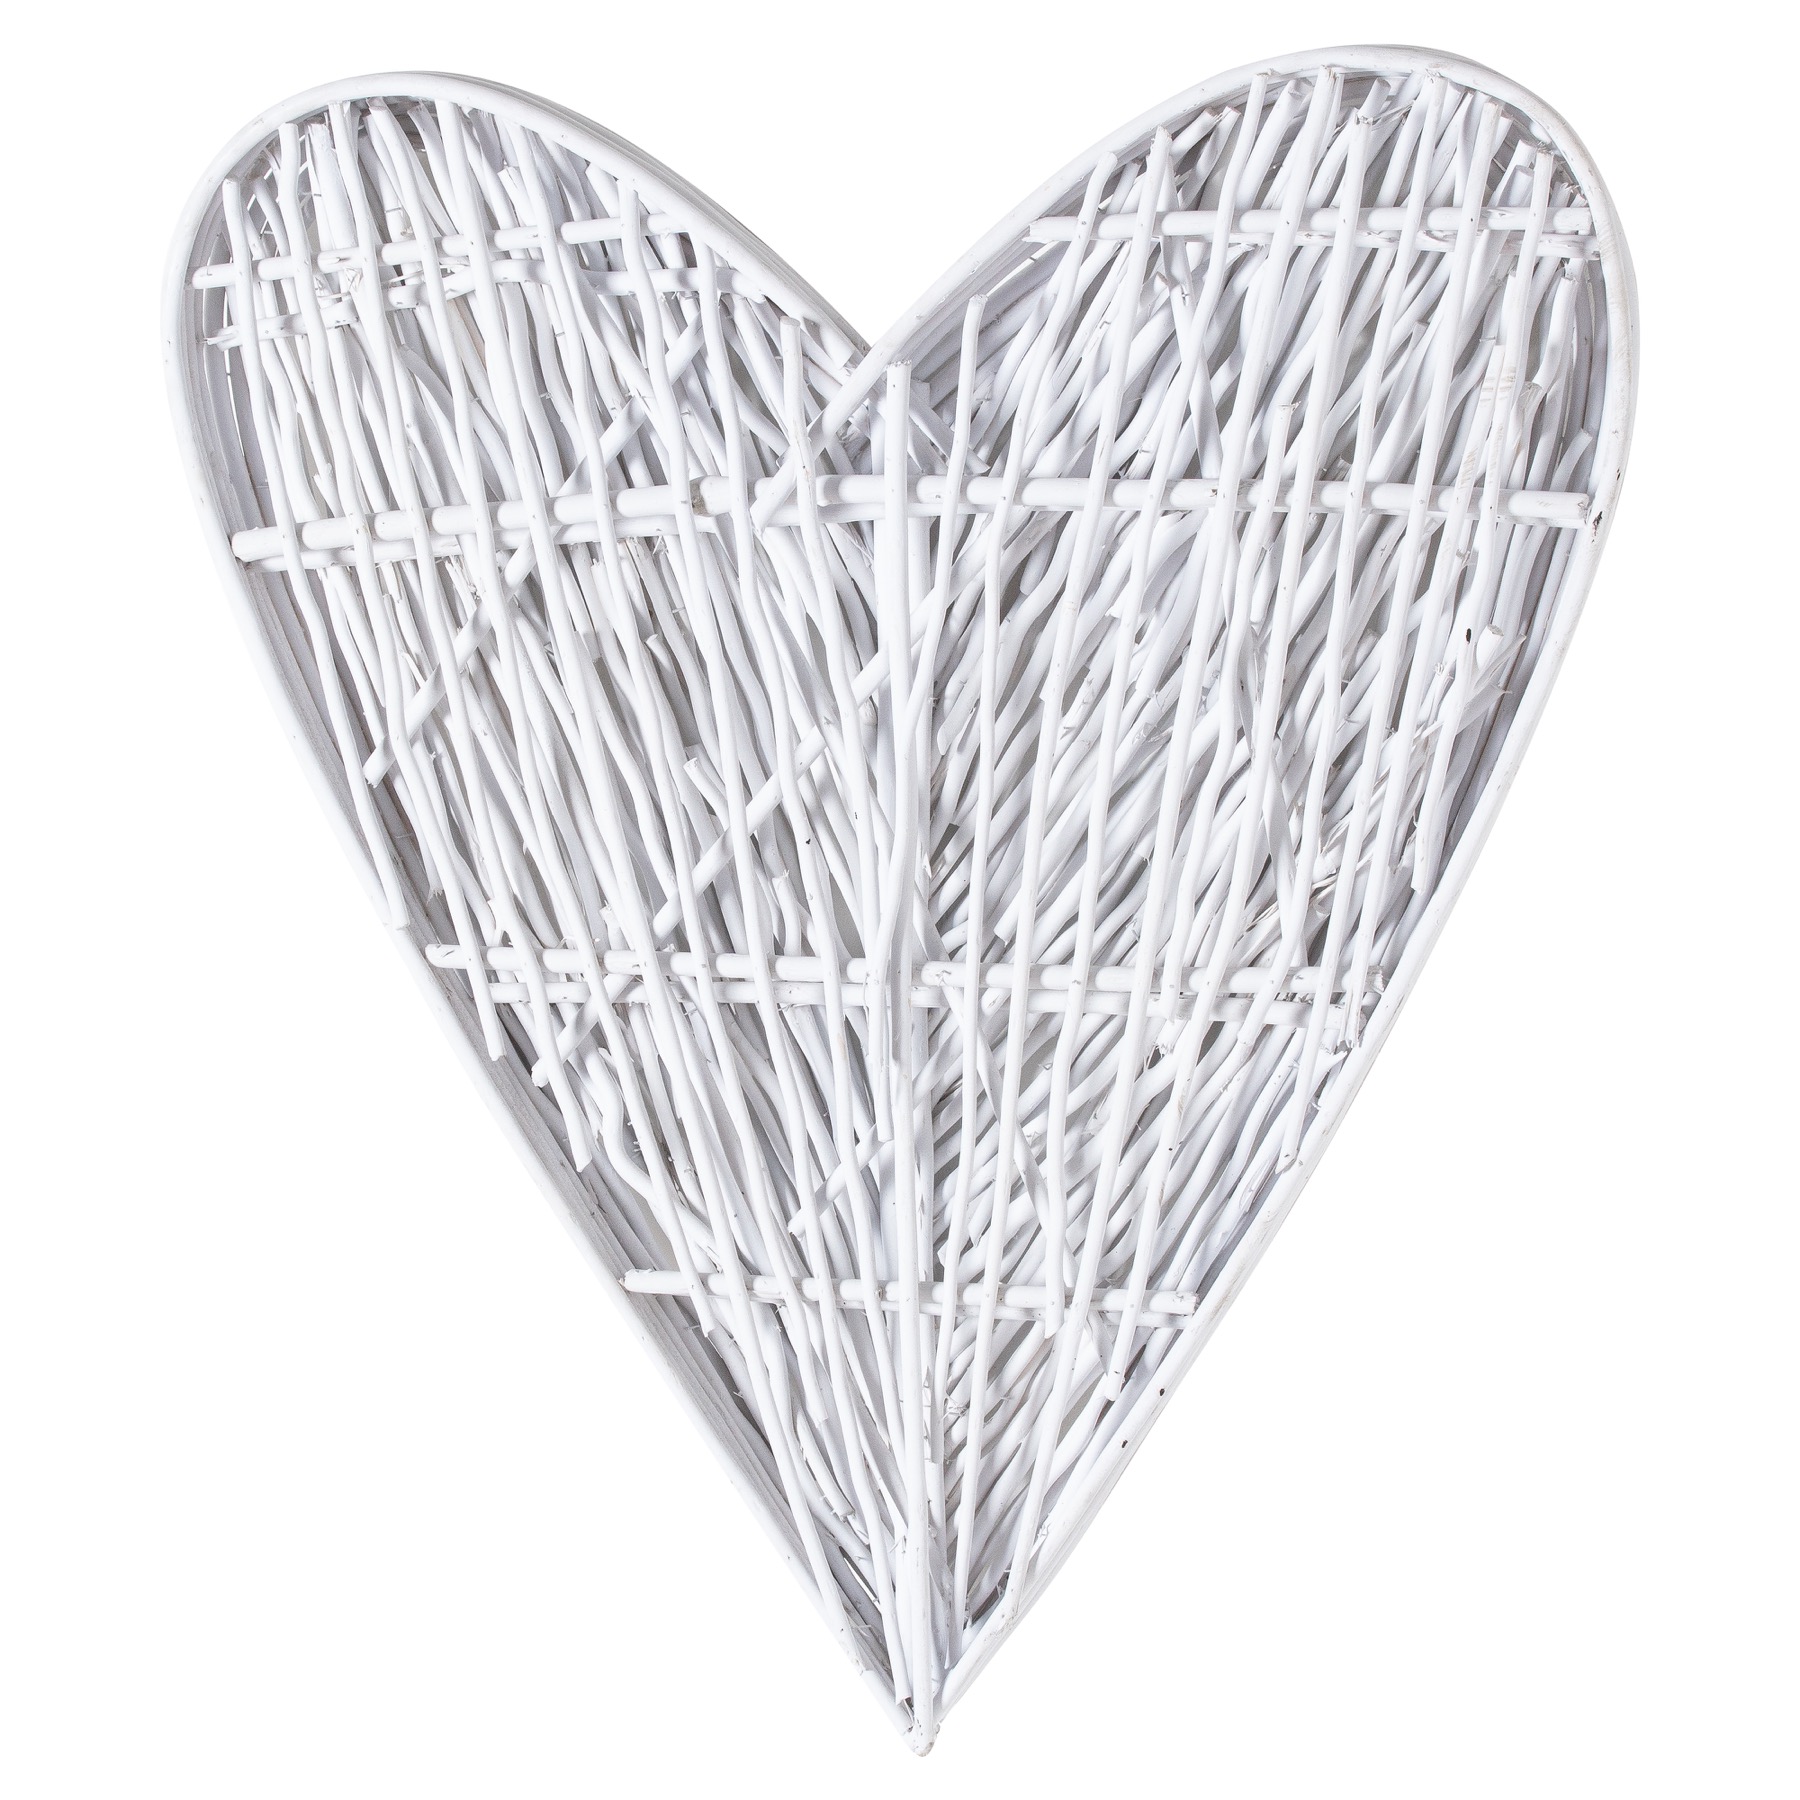 White Willow Branch Heart - Image 3